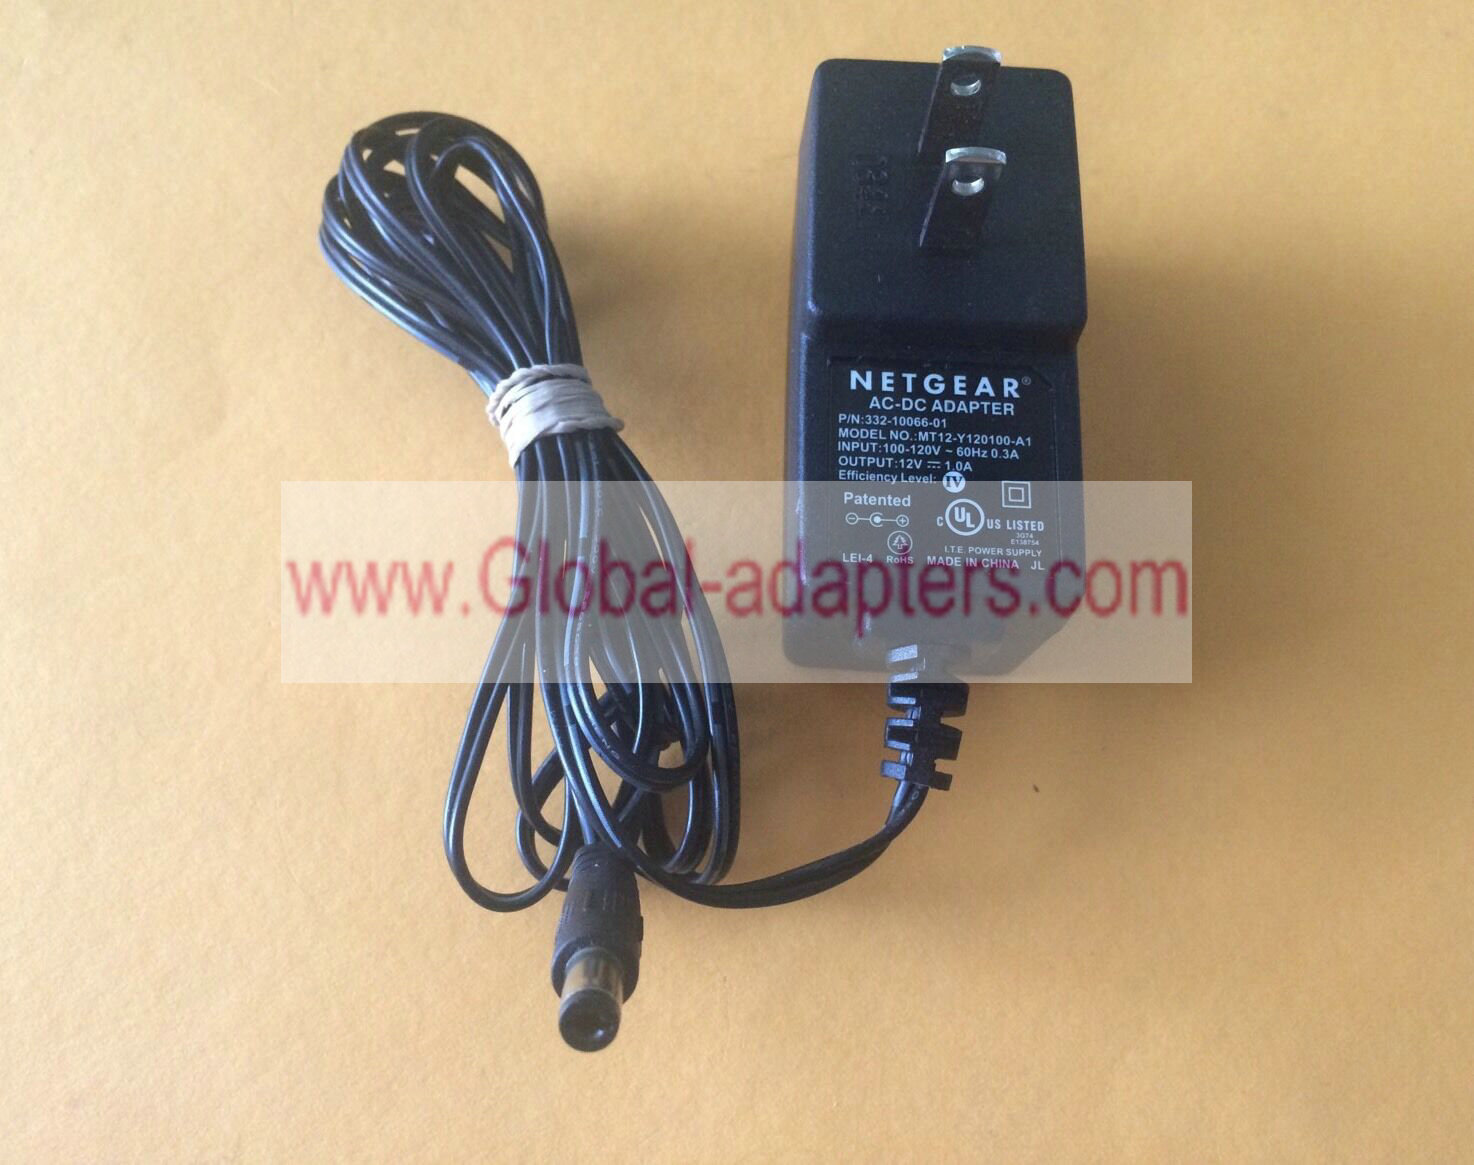 New Netgear MT12-Y120100-A1 AC-DC Adapter for 332-10066-01 332-10041-01 Power Supply